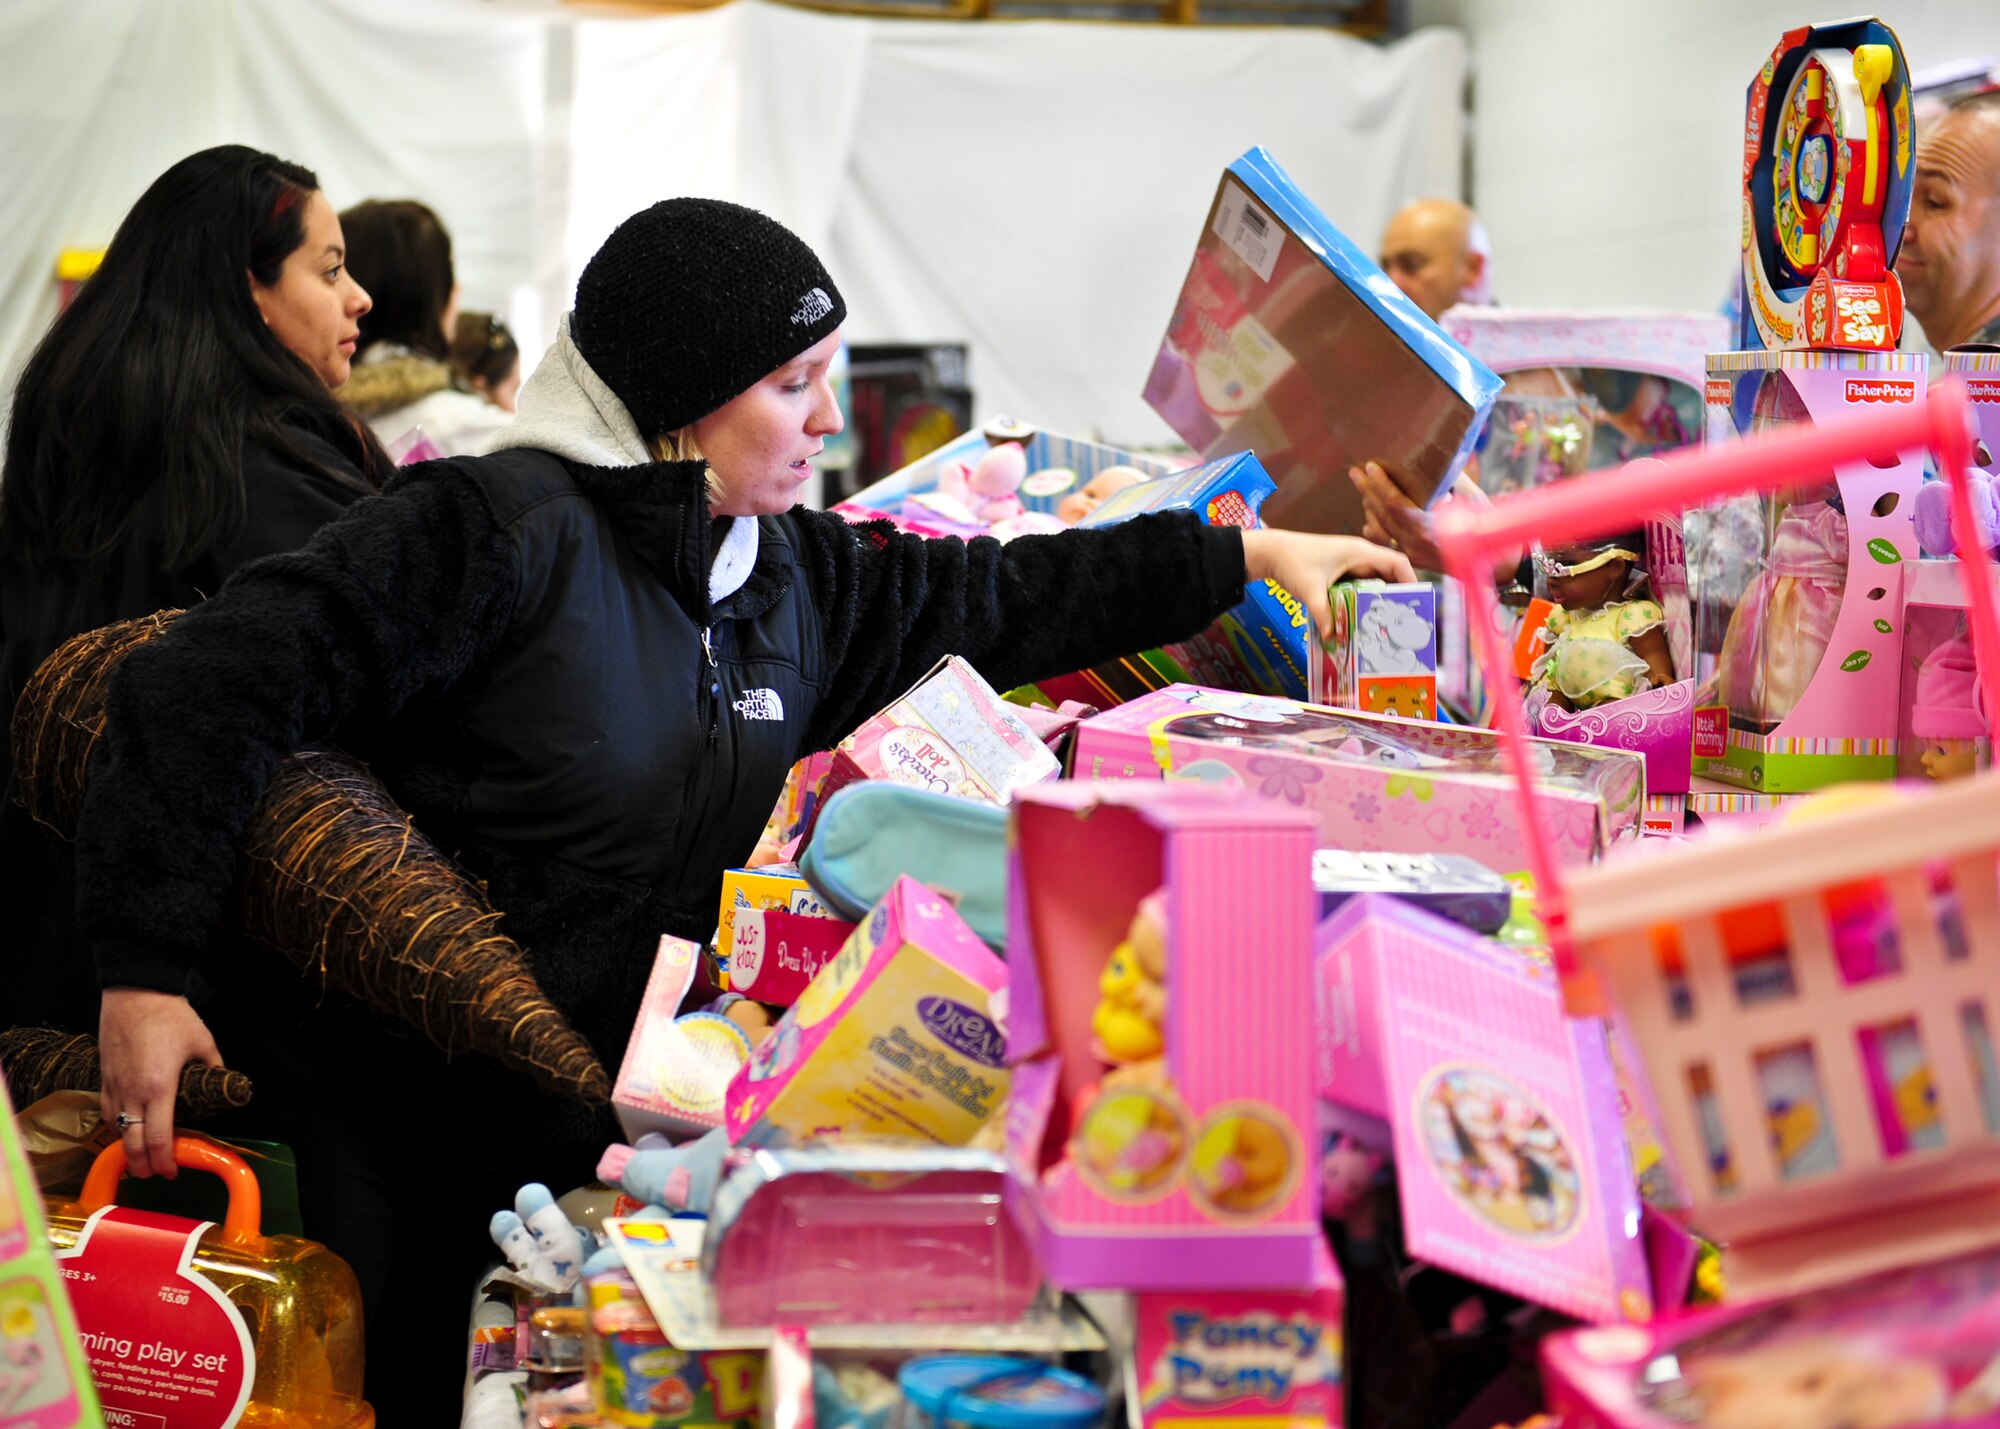 Ashley Walker searches for the perfect toy for her 2-year-old daughter at the 8th annual toy distribution Nov. 30 at the Airman’s attic. Members of all services up to the grade of E-5, lined up to find the perfect gift for their children. More than 4,000 toys were donated for the event, helping more than 200 families in the Eglin community. (U.S. Air Force photo/Sachel Seabrook)